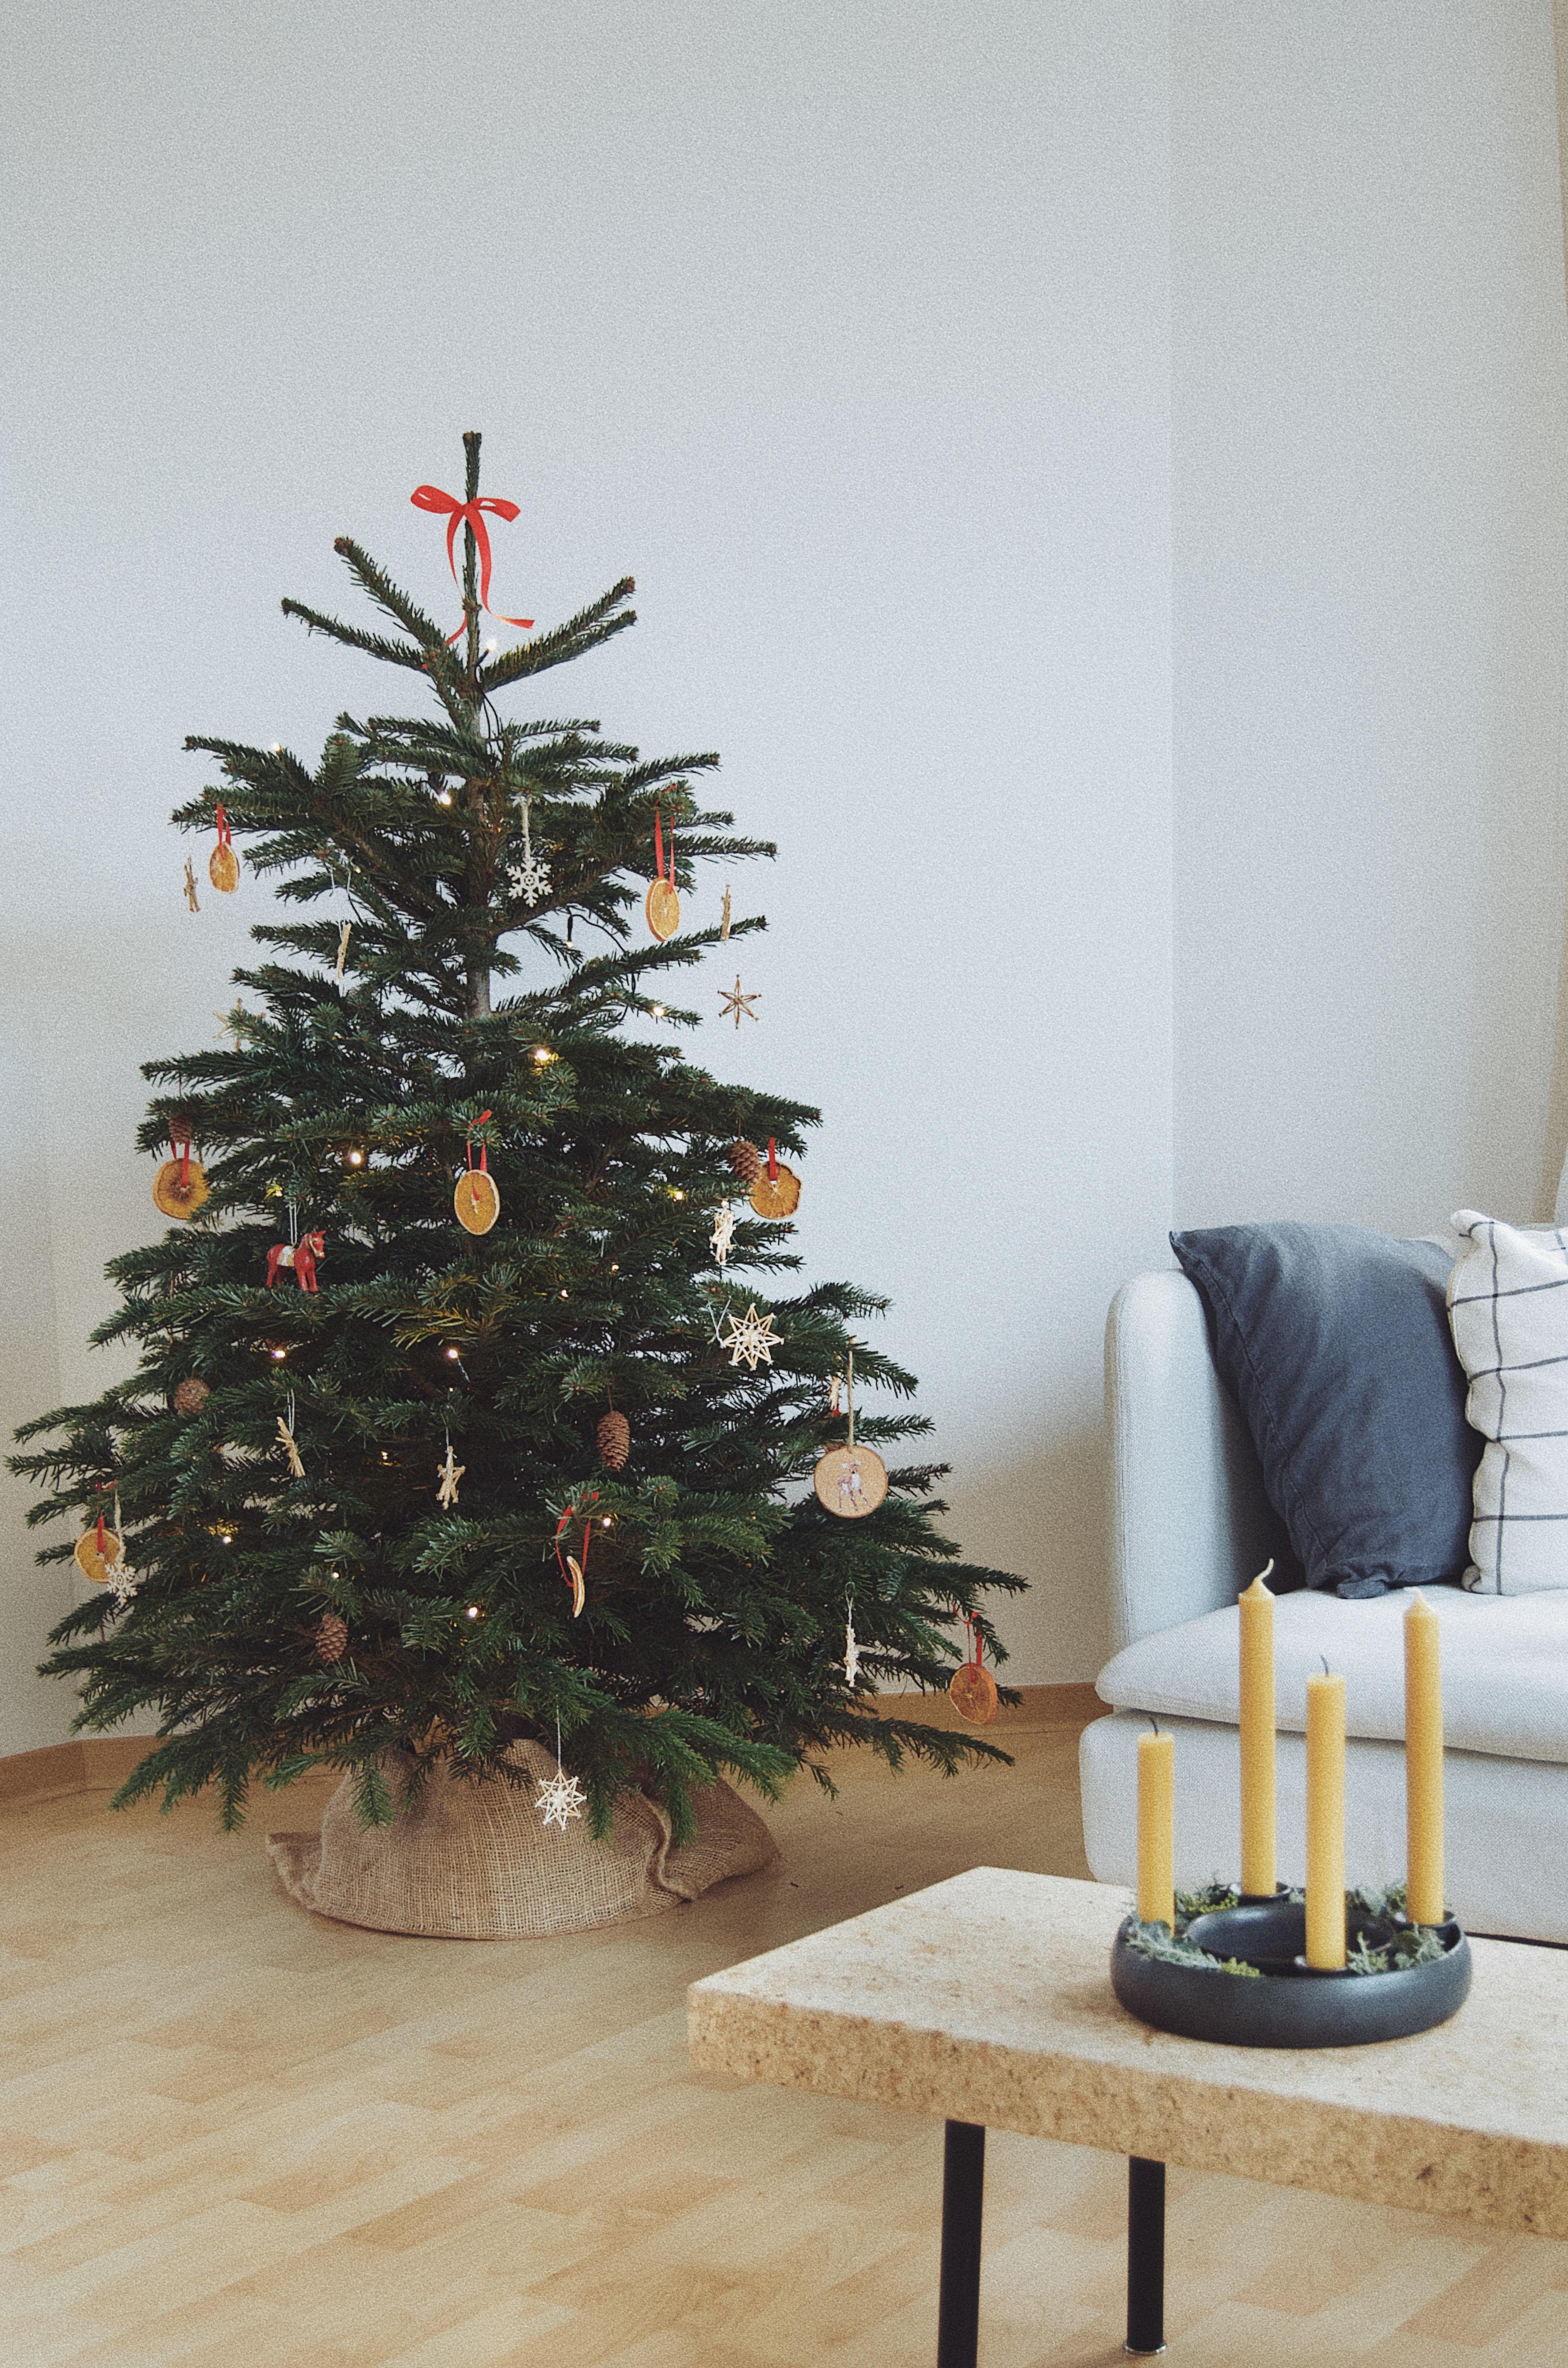 It’s beginning to look a lot like Christmas. 🎄 #weihnachtsbaum #christmastree #christmas #weihnachten #interior #wohnzimmer #cozy #livingroom